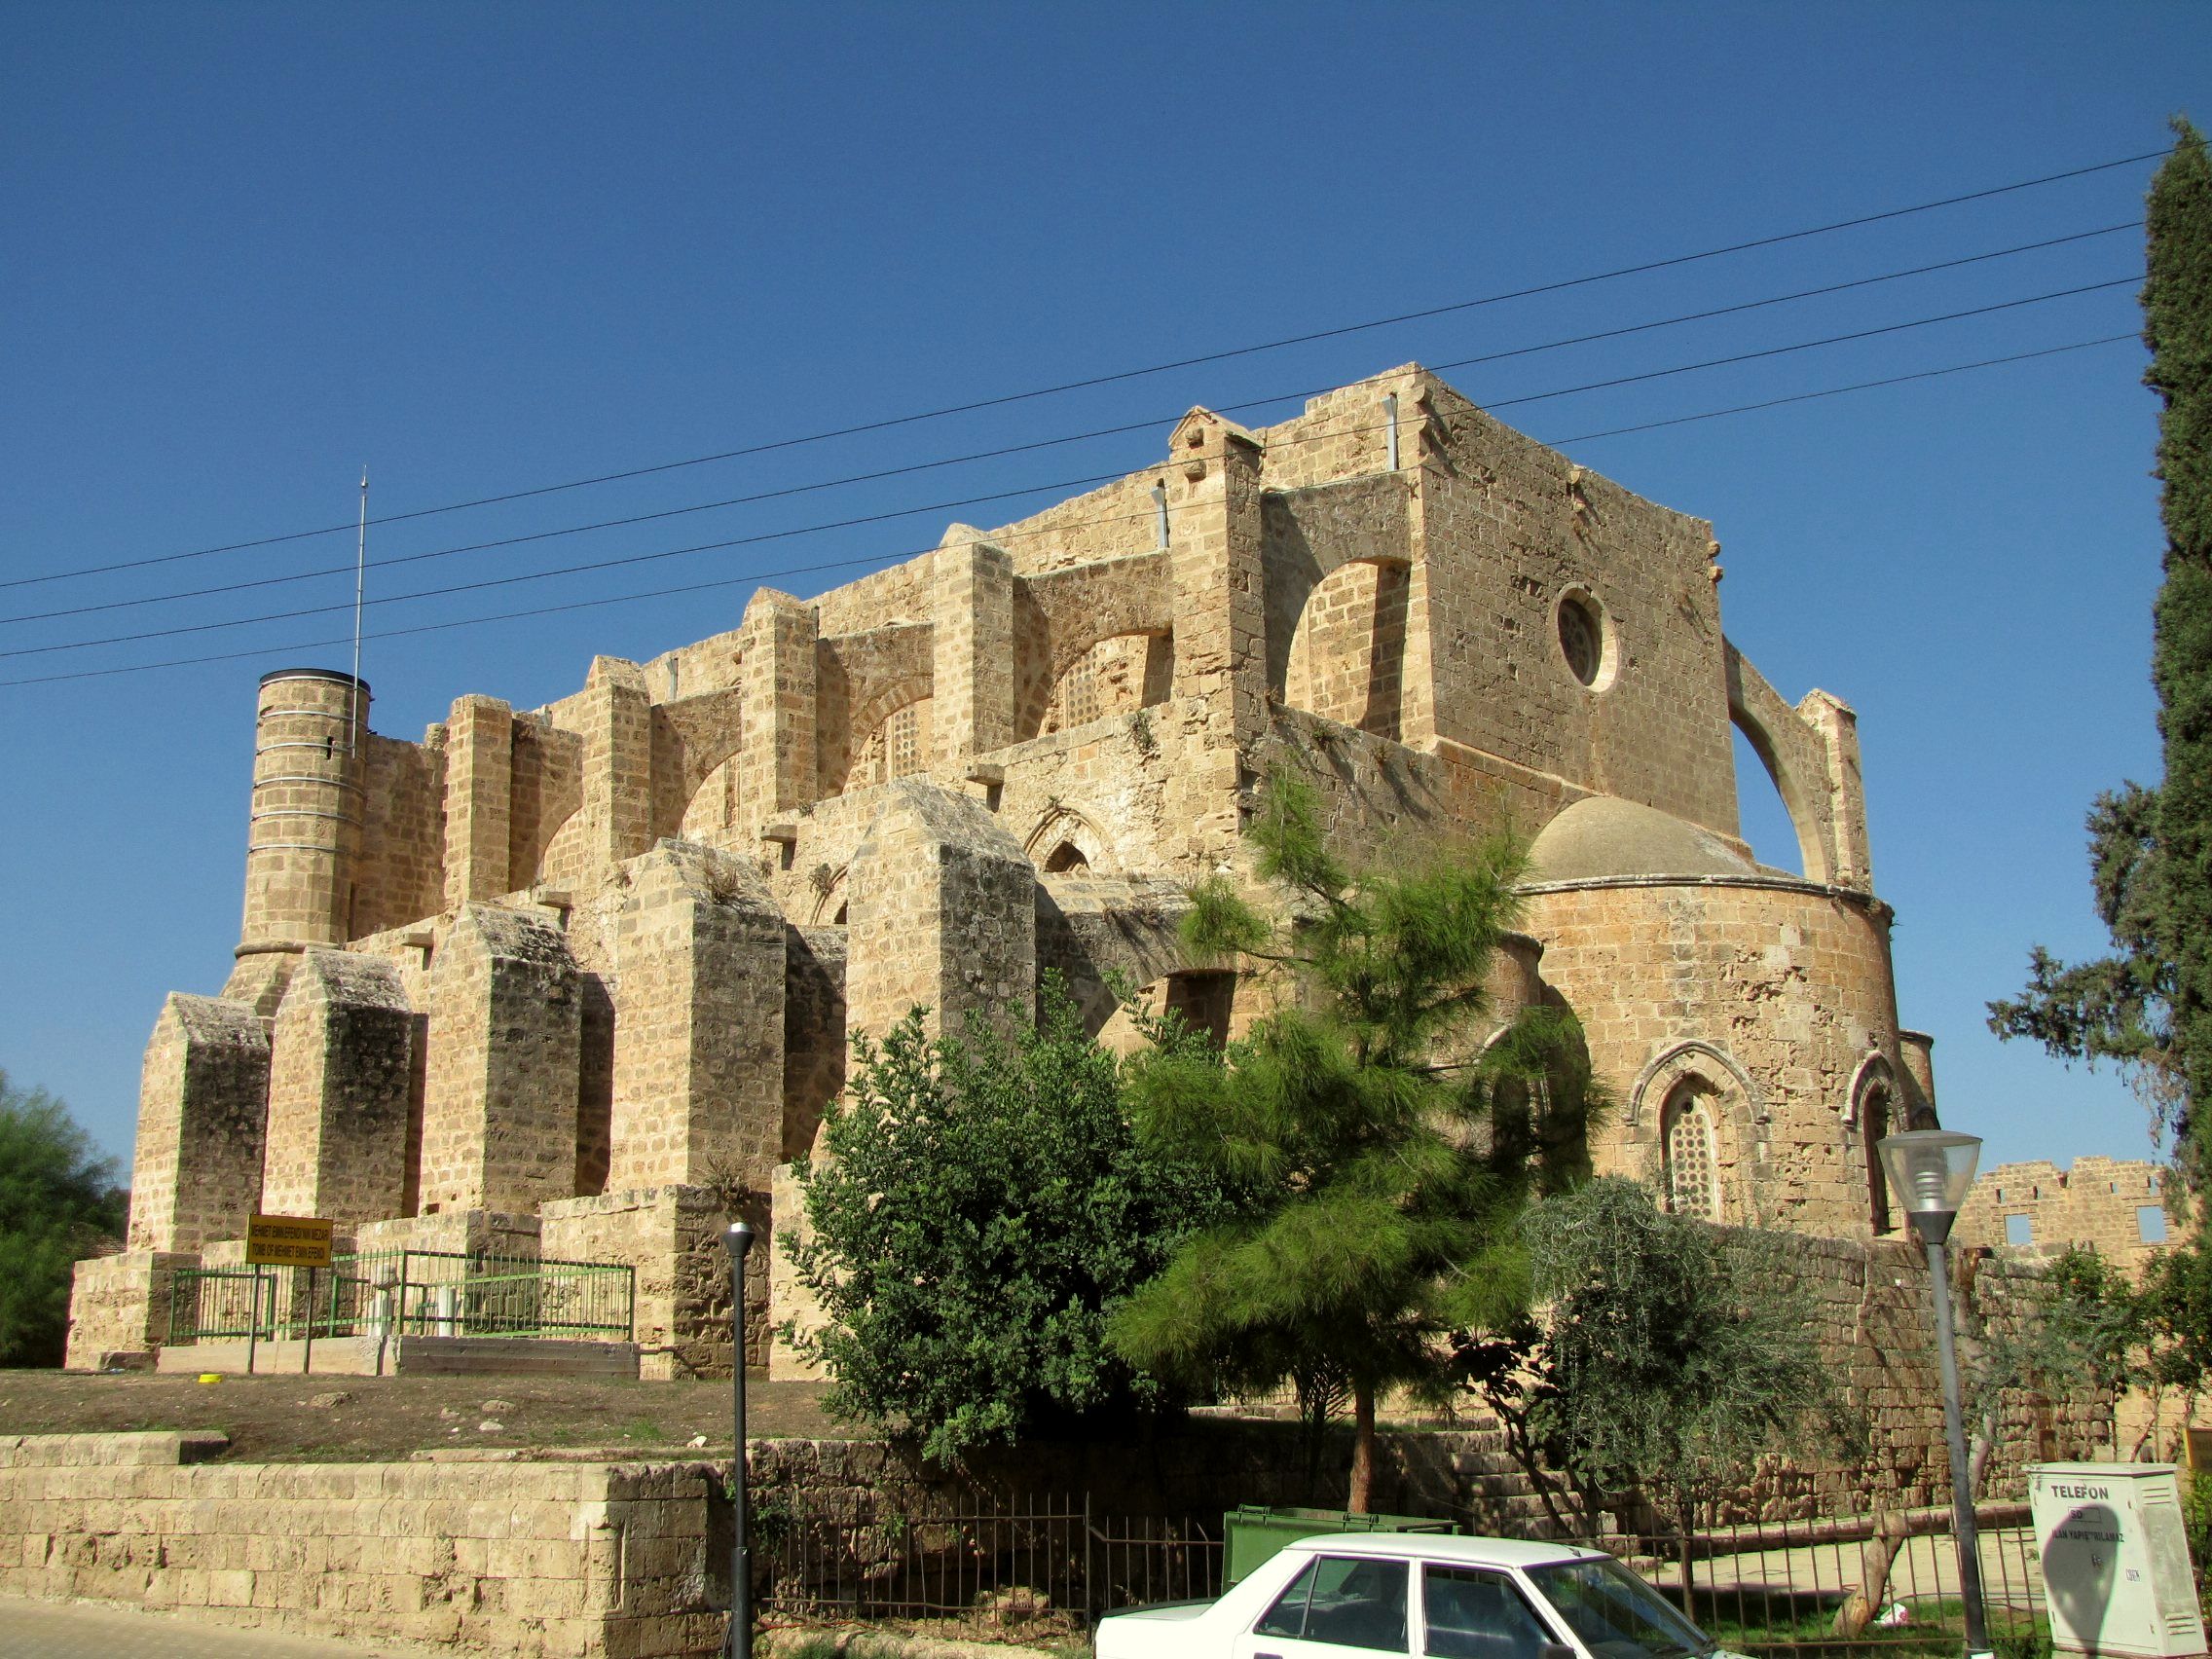 Sinan Pasha Mosque (Church of SS Peter and Paul) Famagusta